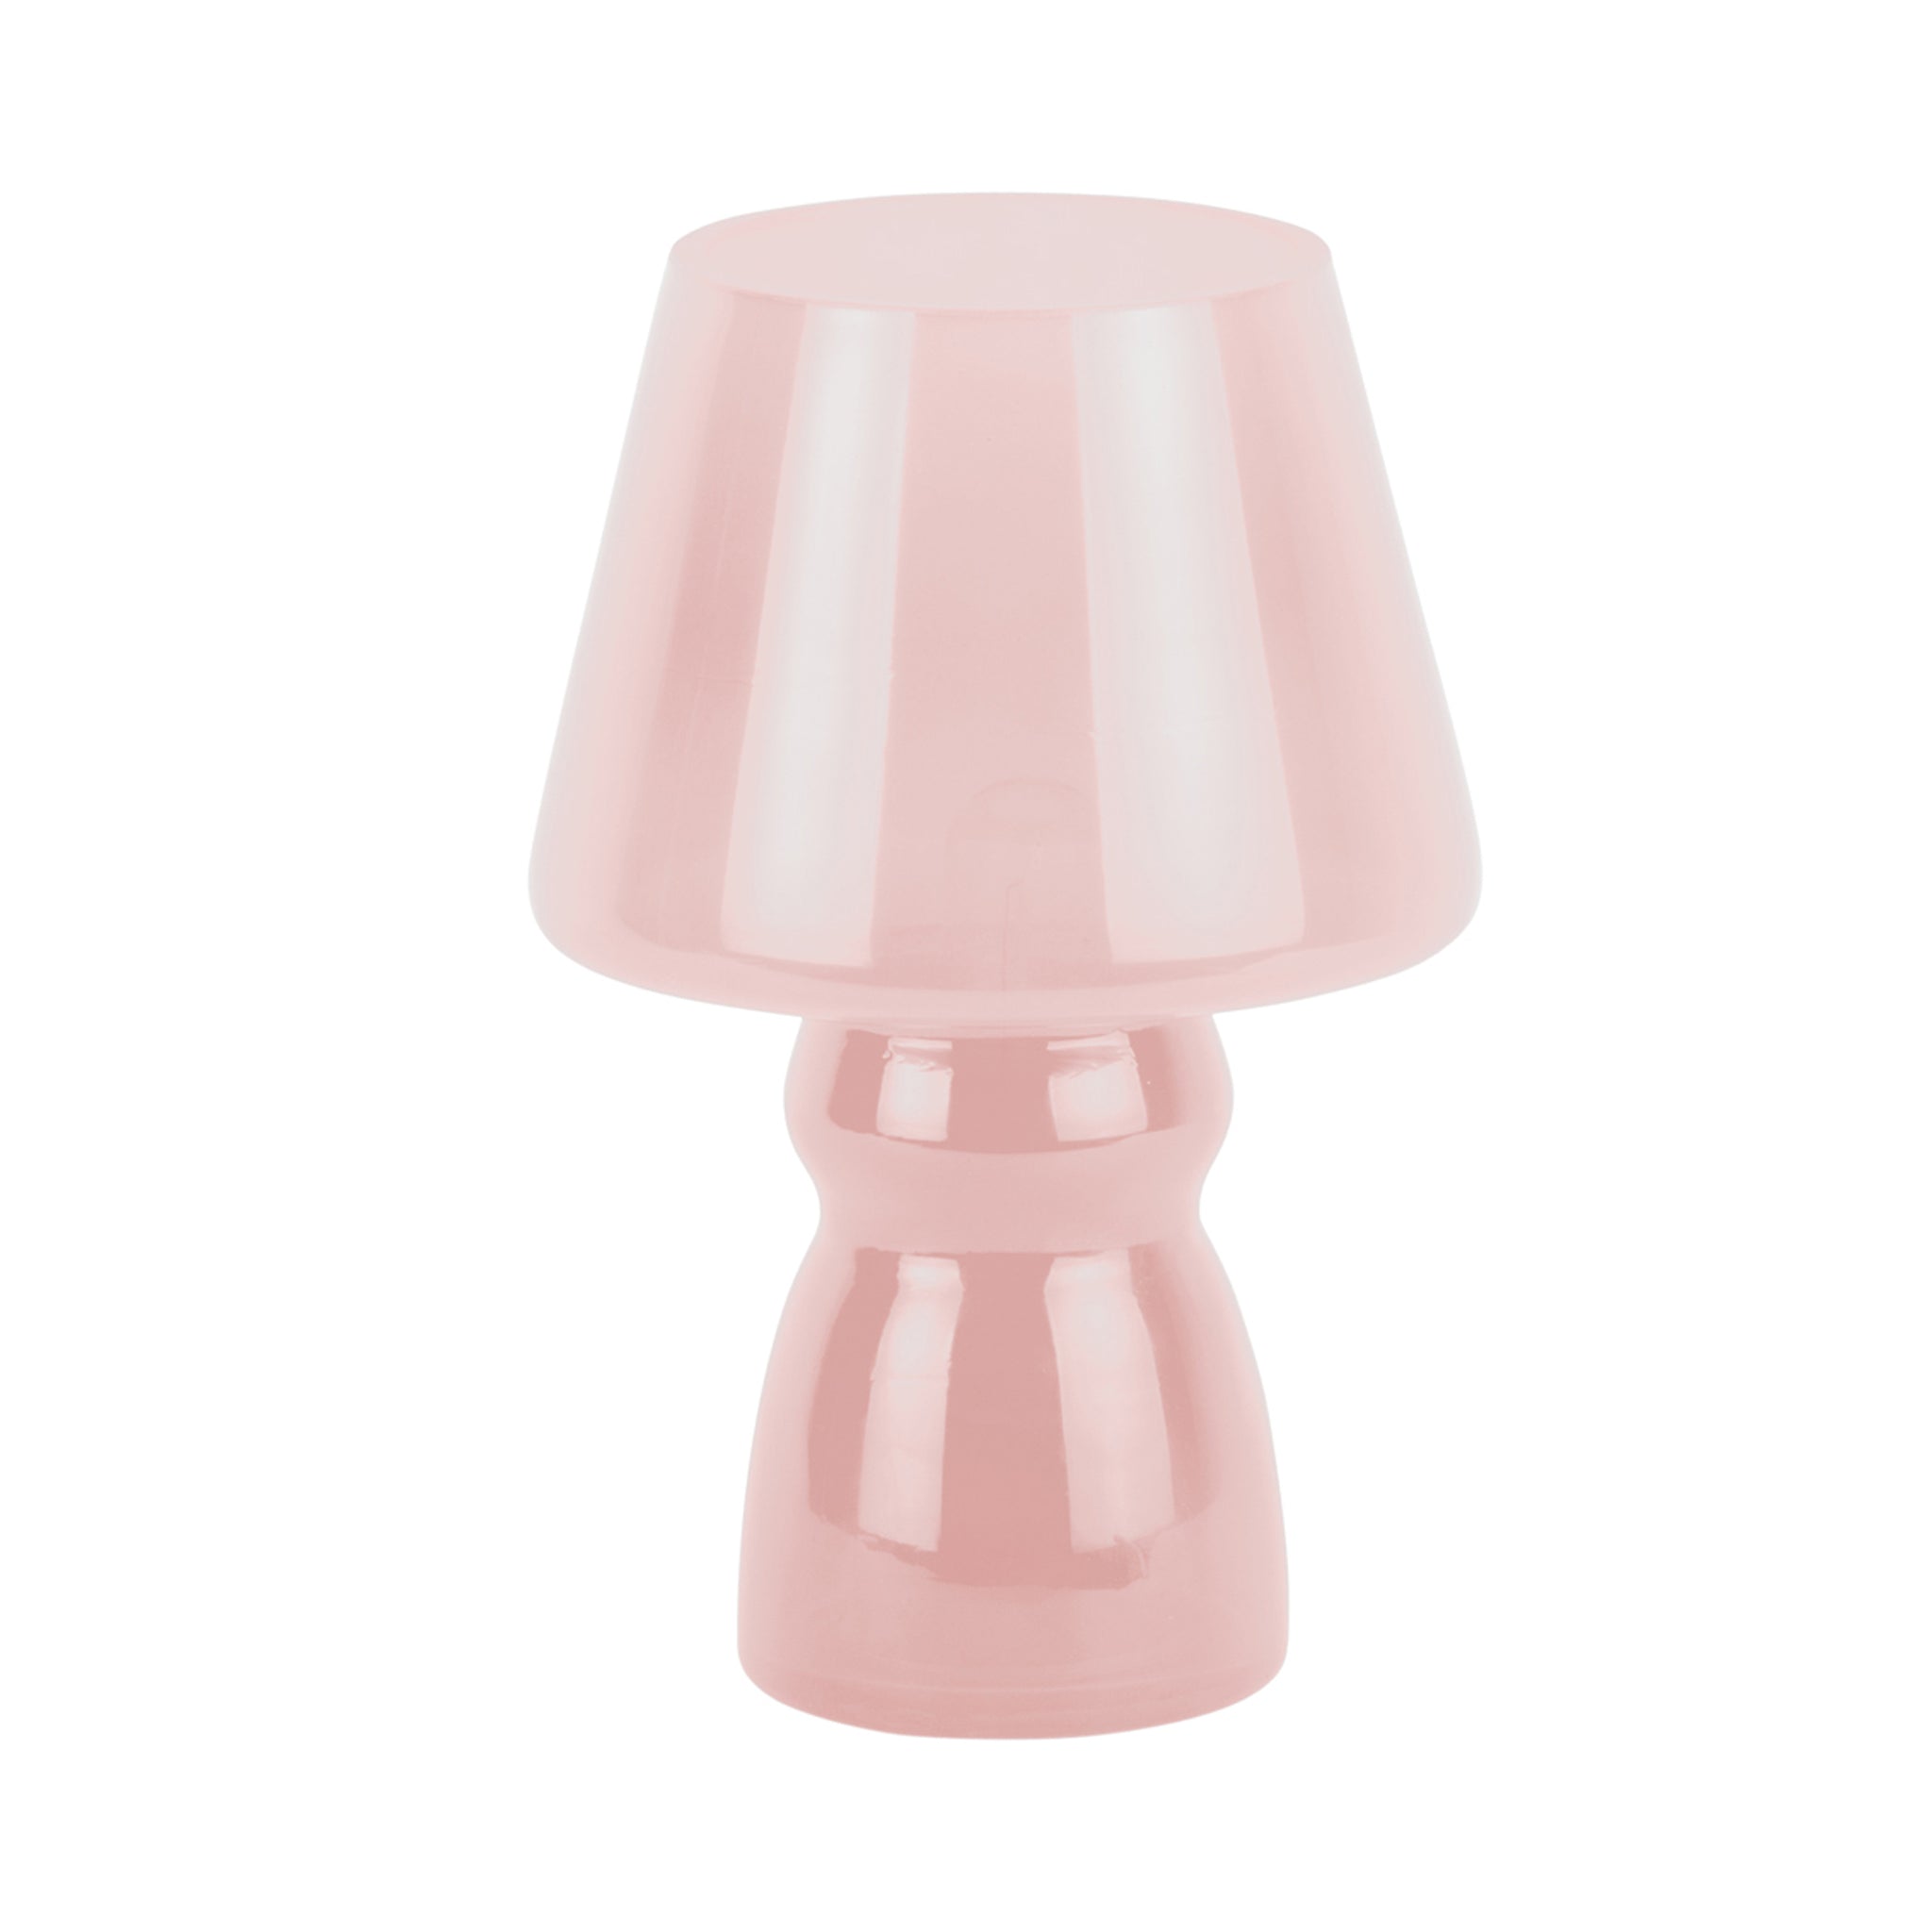 Classic Glass Portable Table Lamp - Soft Pink